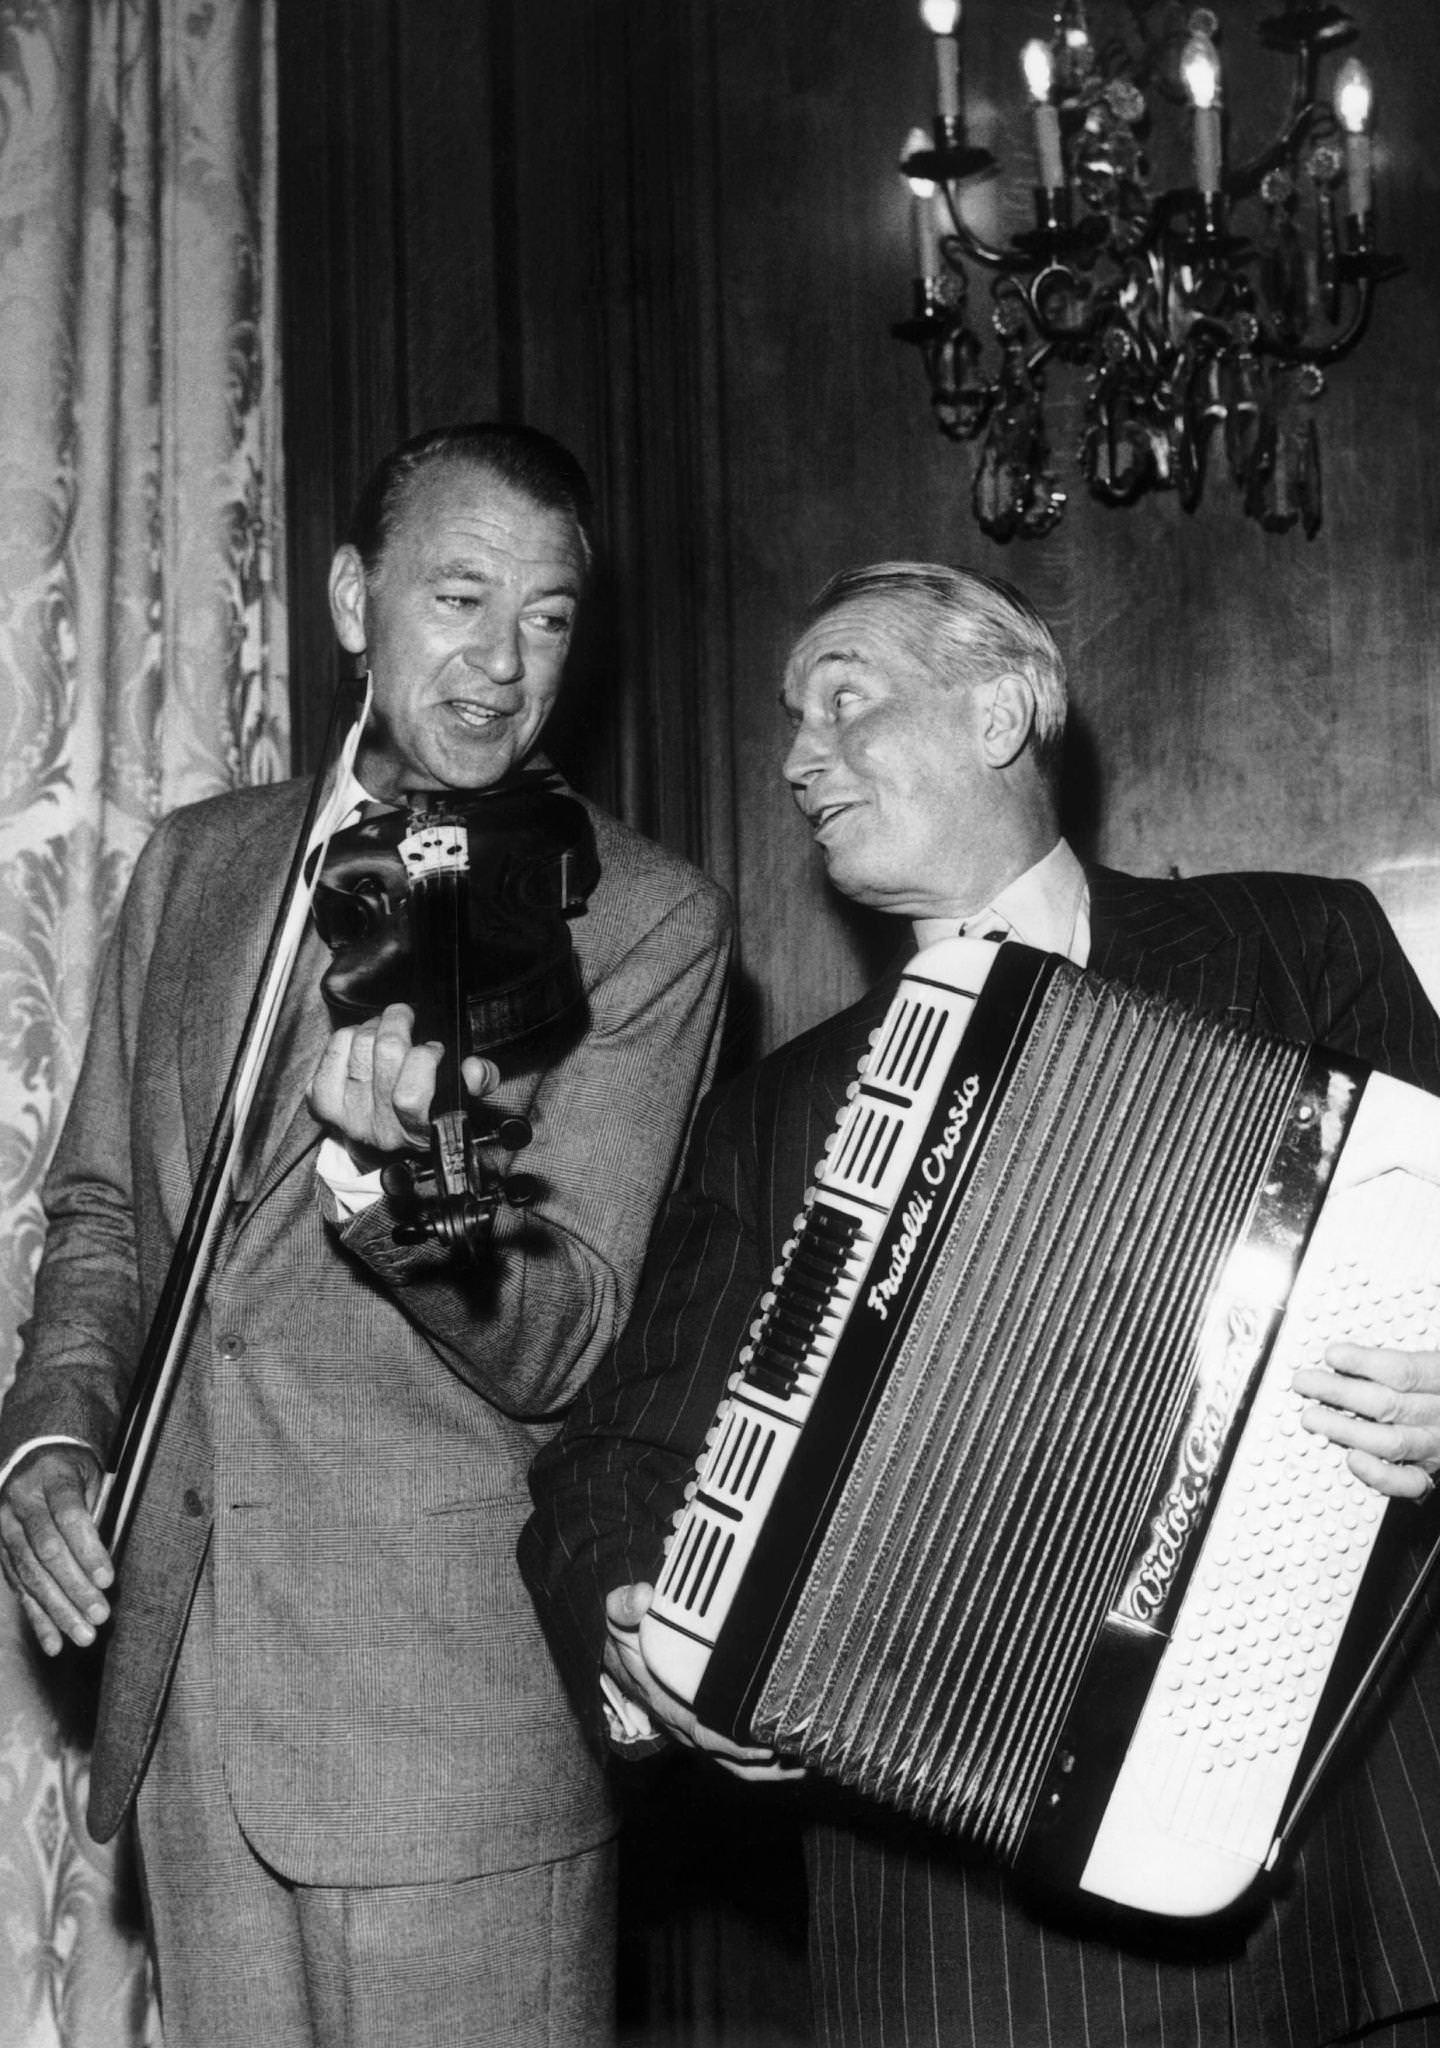 Maurice Chevalier and Gary Cooper, the two actors are playing music during the party held for the release of the movie 'Love in the Afternoon' on June 18, 1957 in Paris, France.